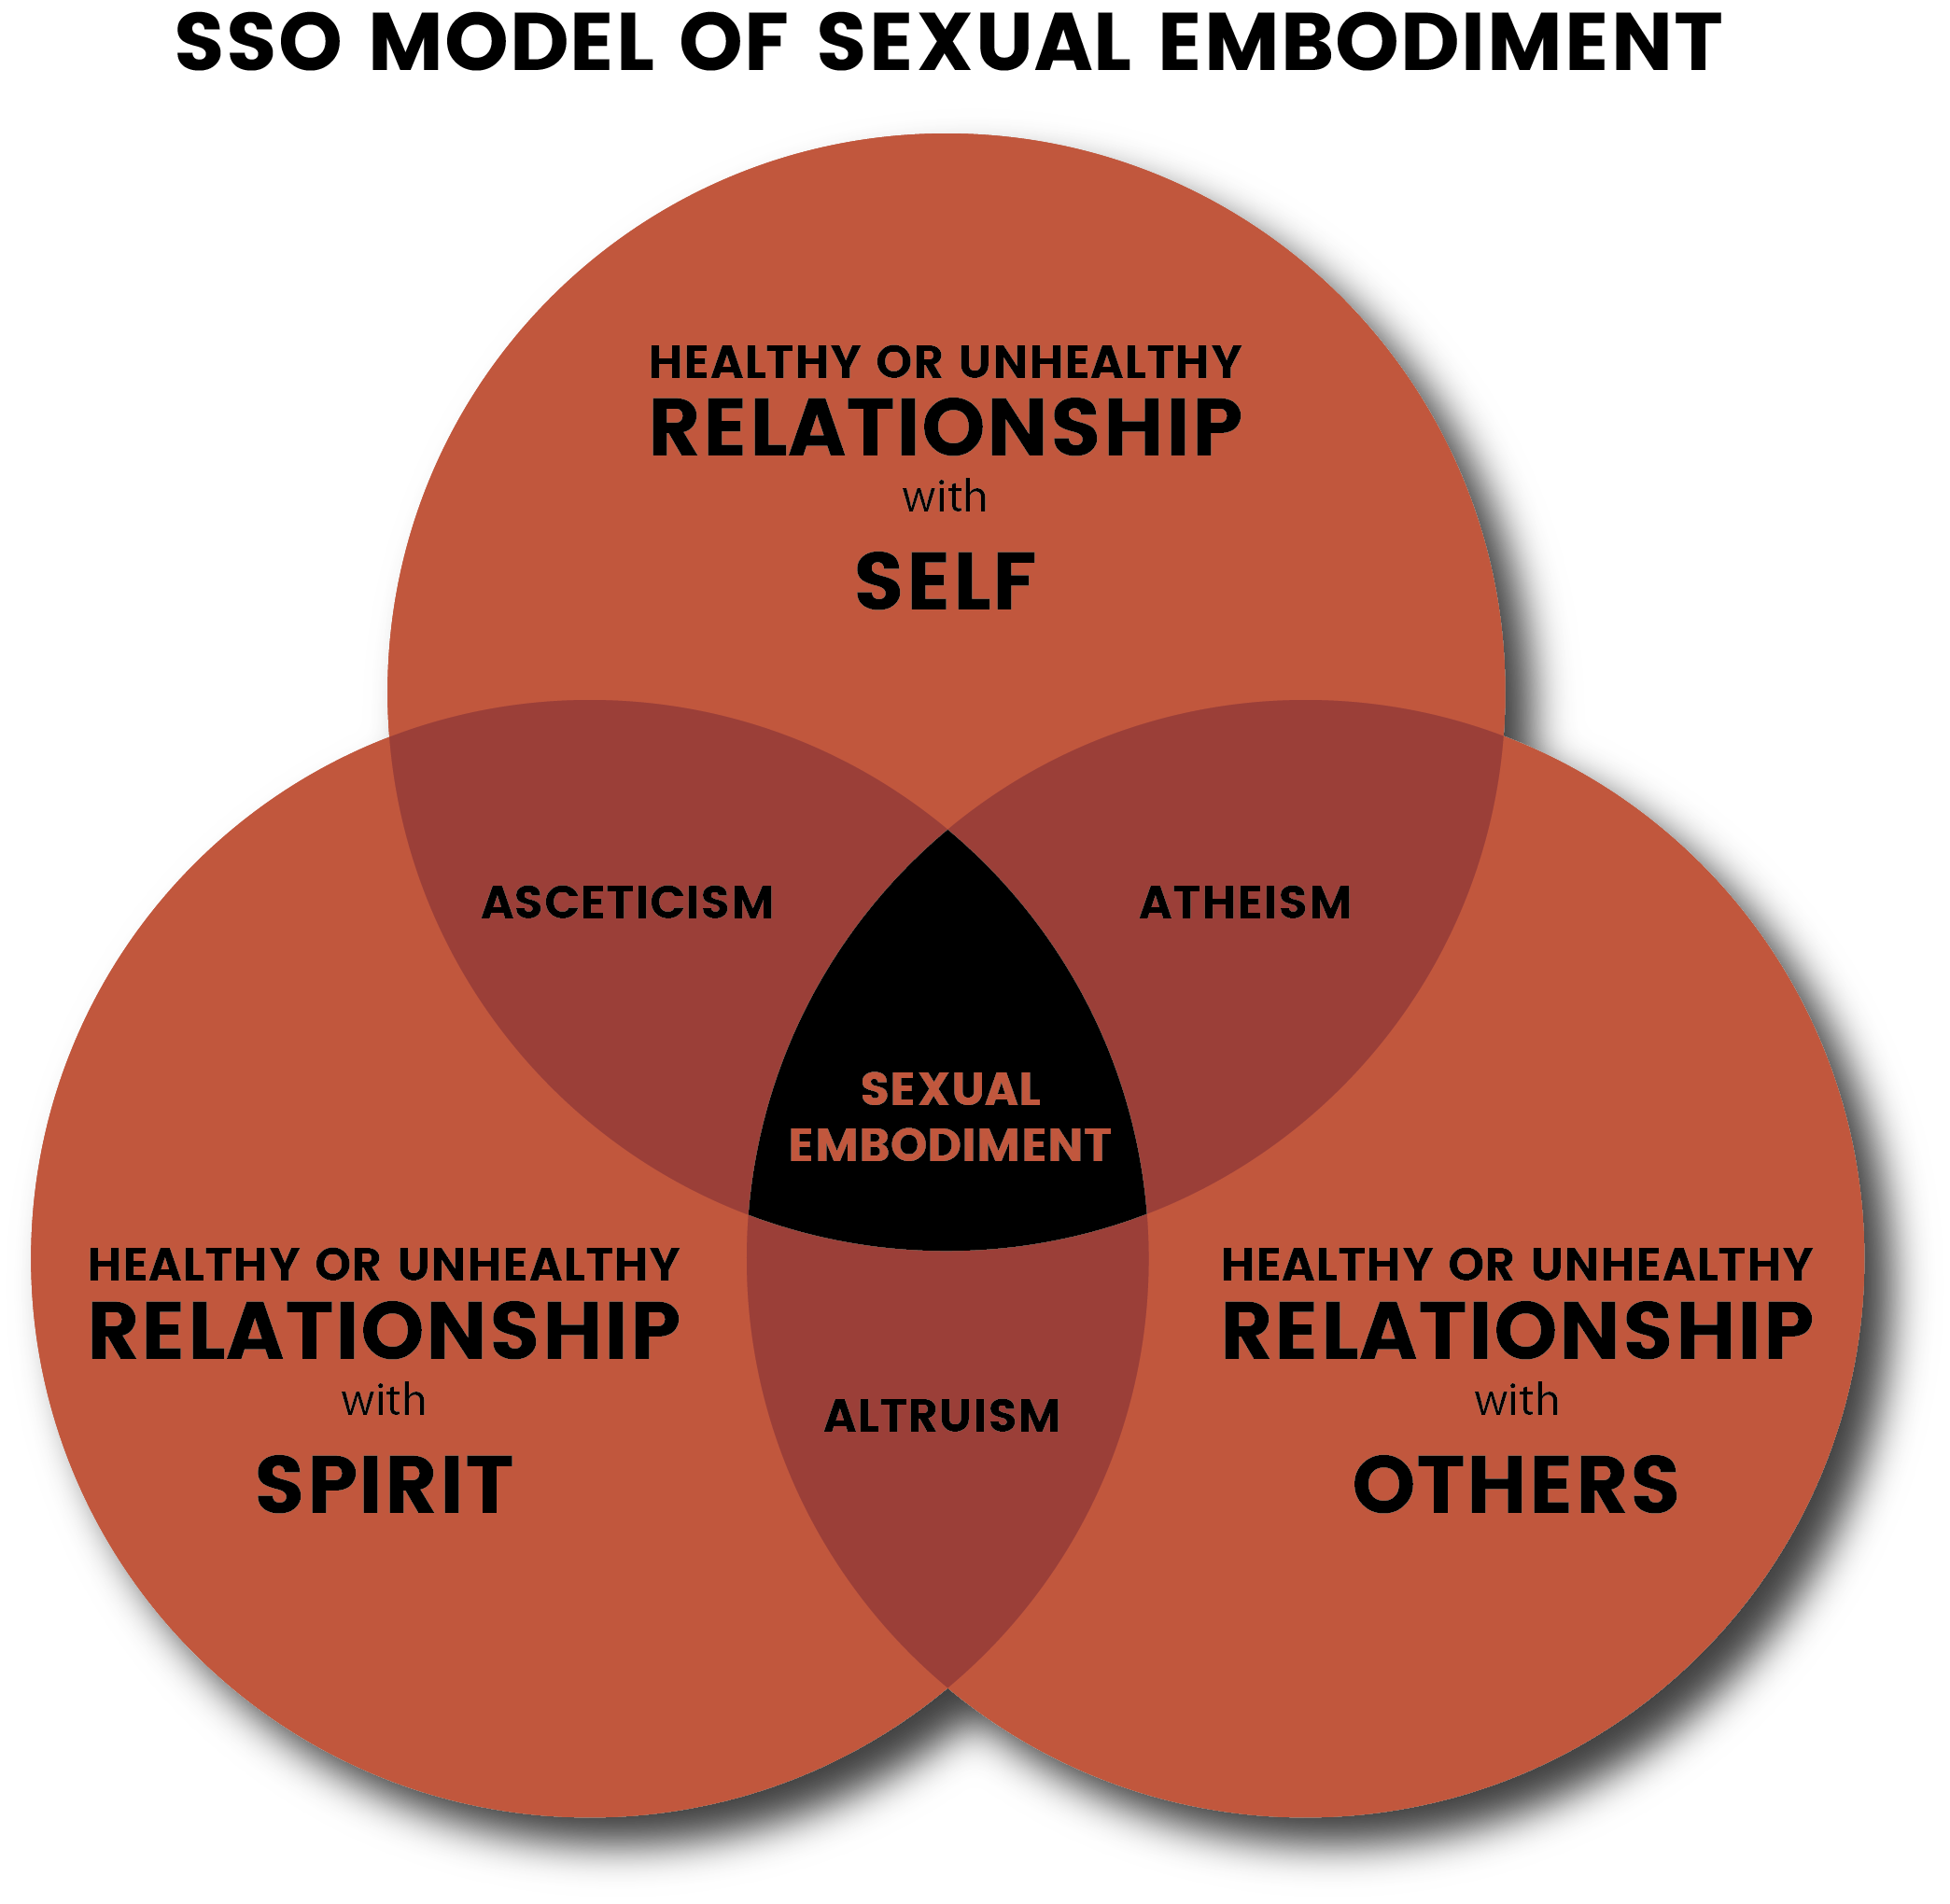 sso model looking at relationships tied to sexual embodiment 2